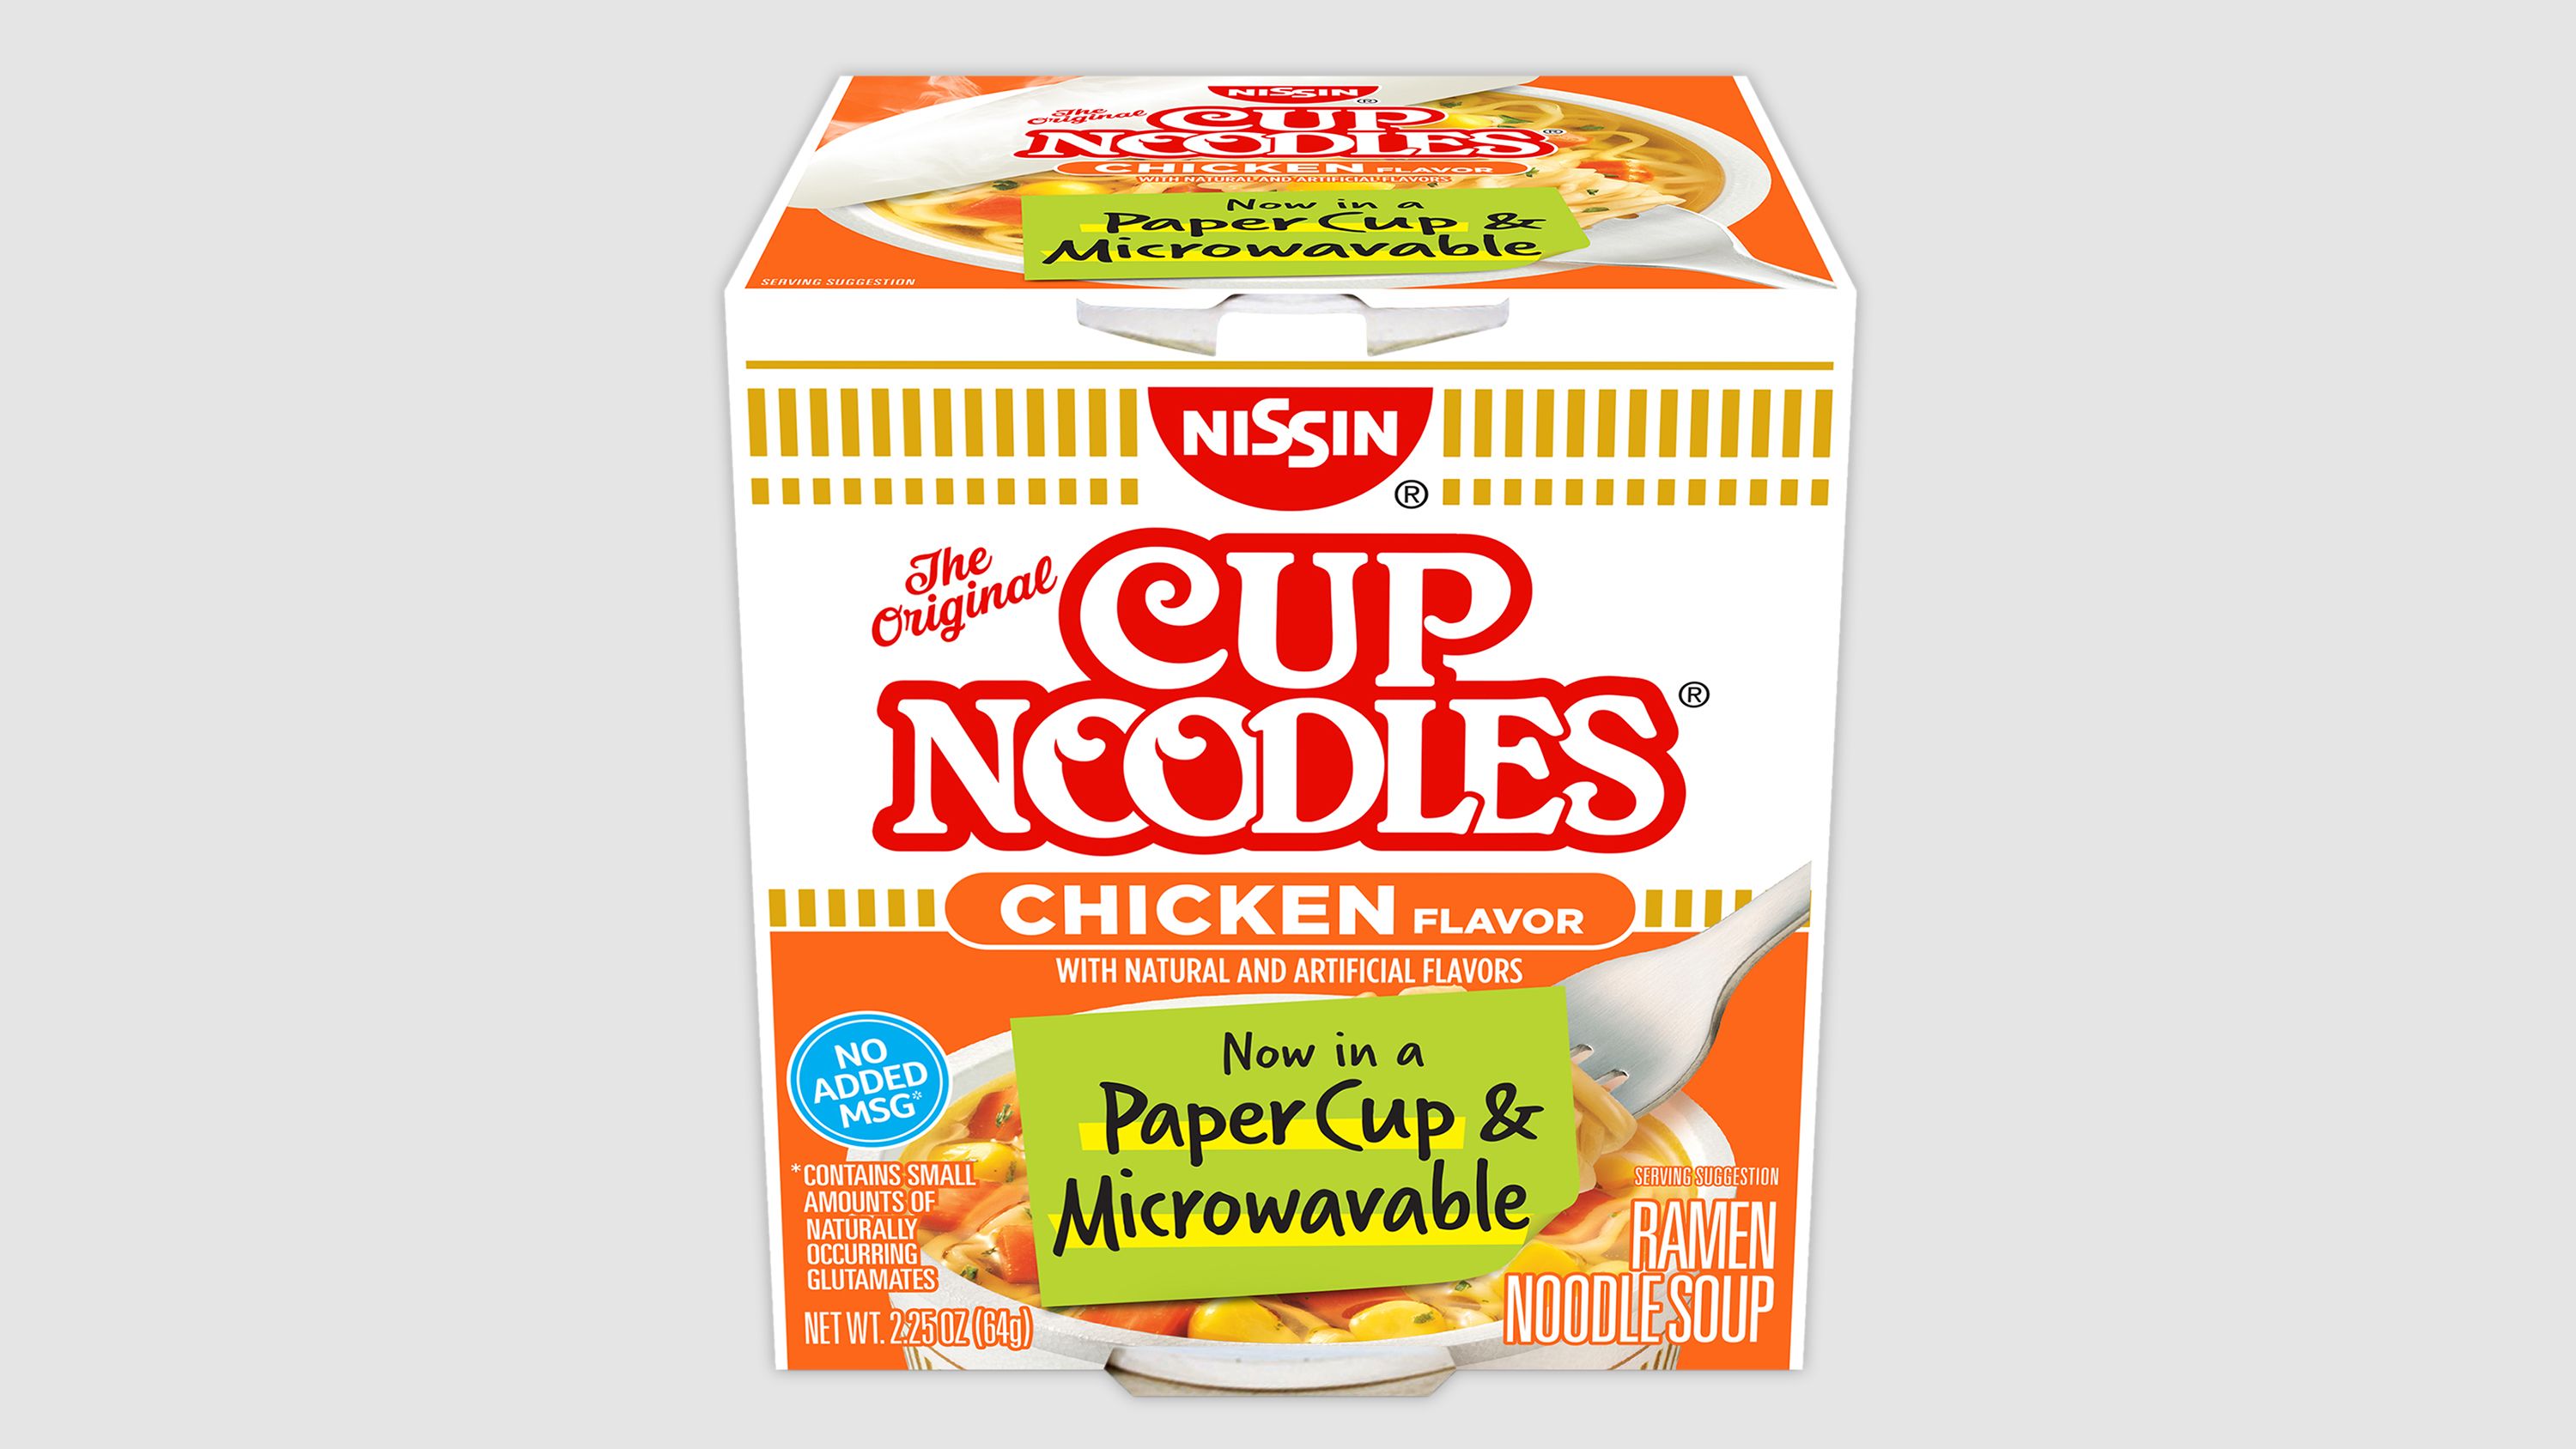 We Pit Cup Noodles Against Cup Noodle and the Difference Is Real